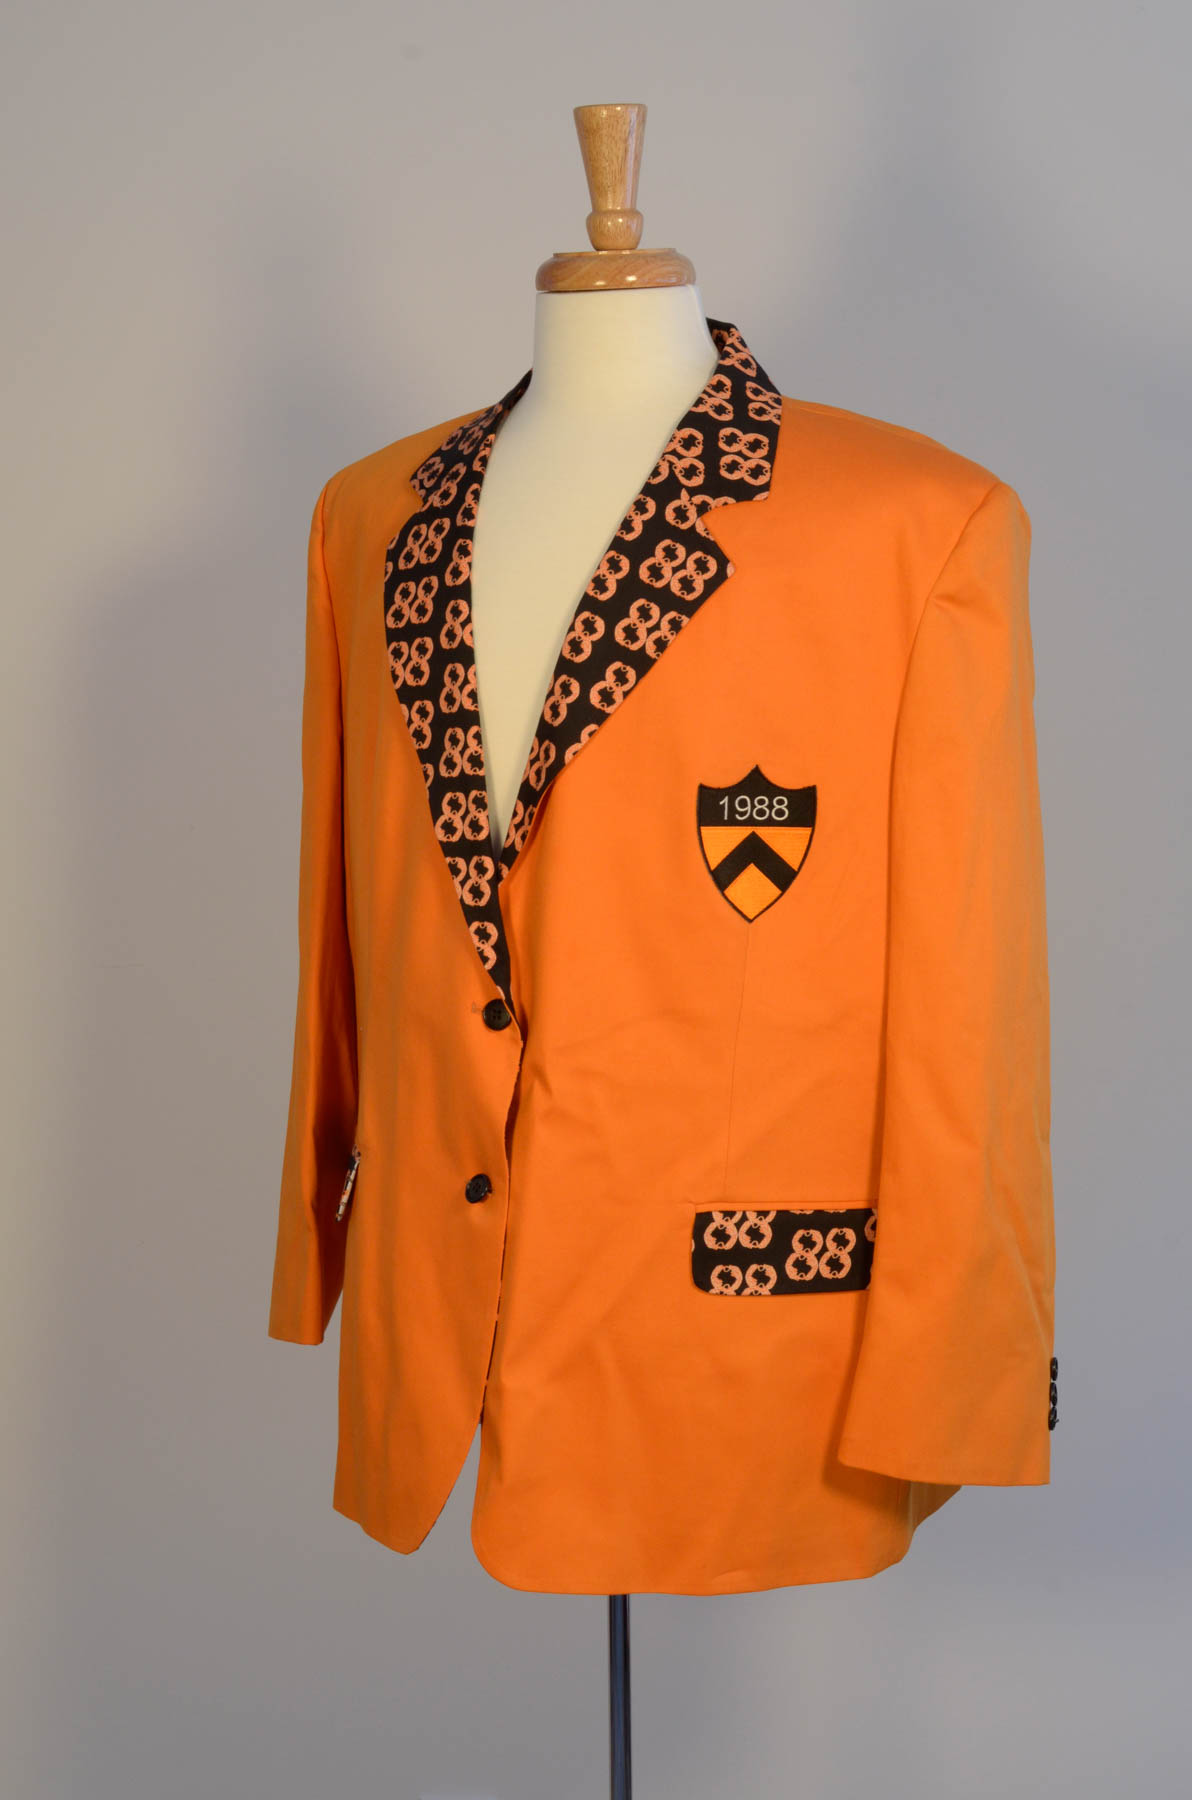 Reunion Jacket 1988 25th Front